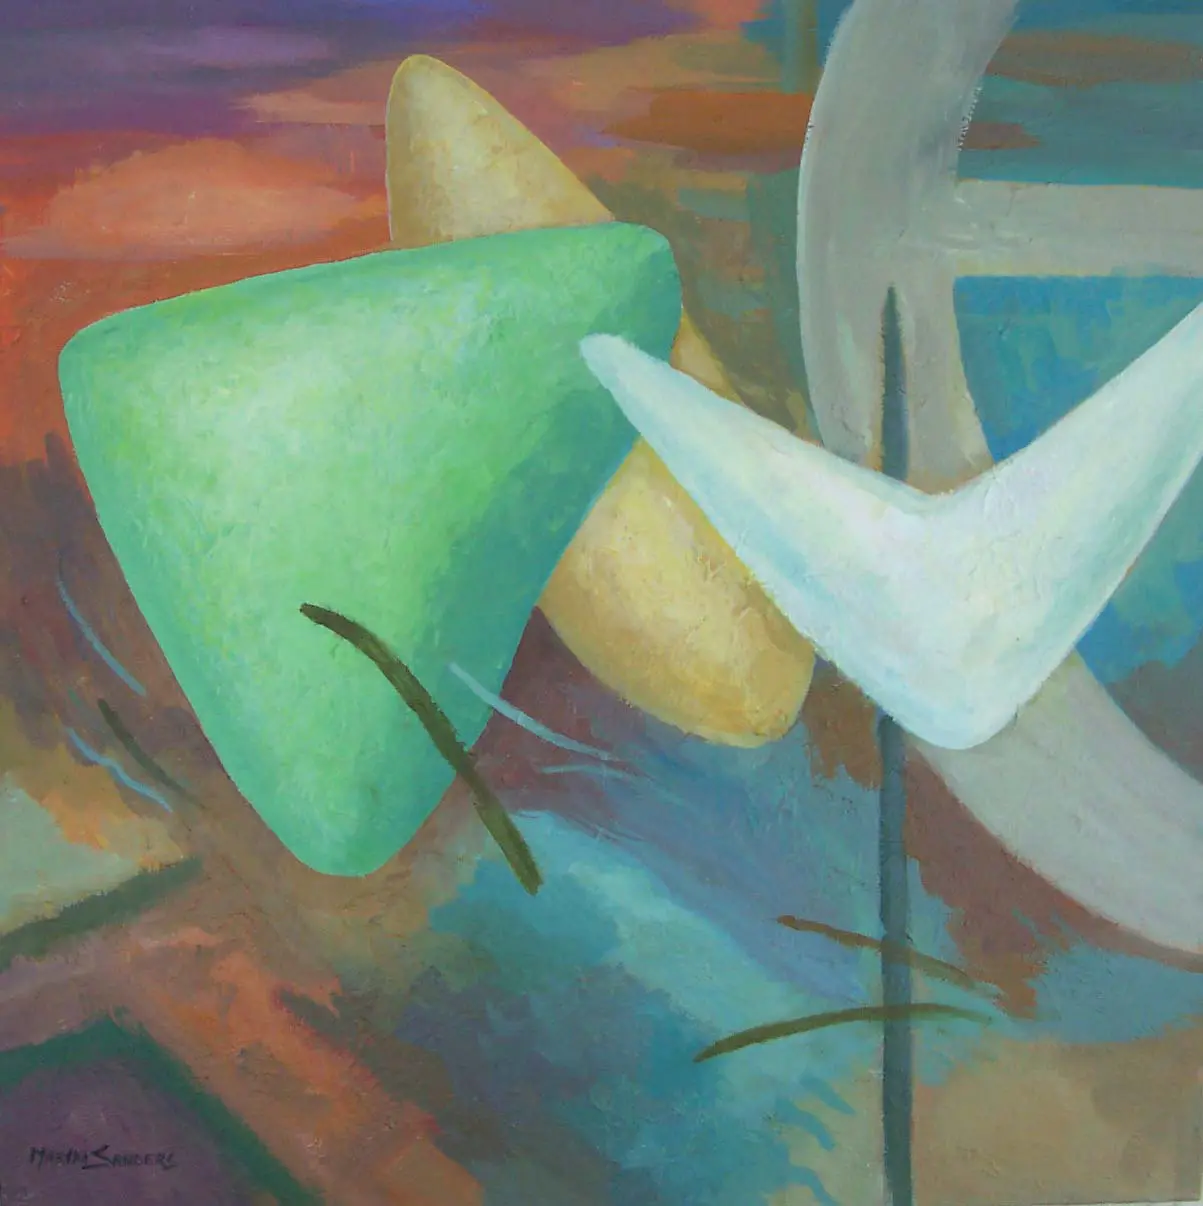 A painting of an abstract scene with green and white shapes.